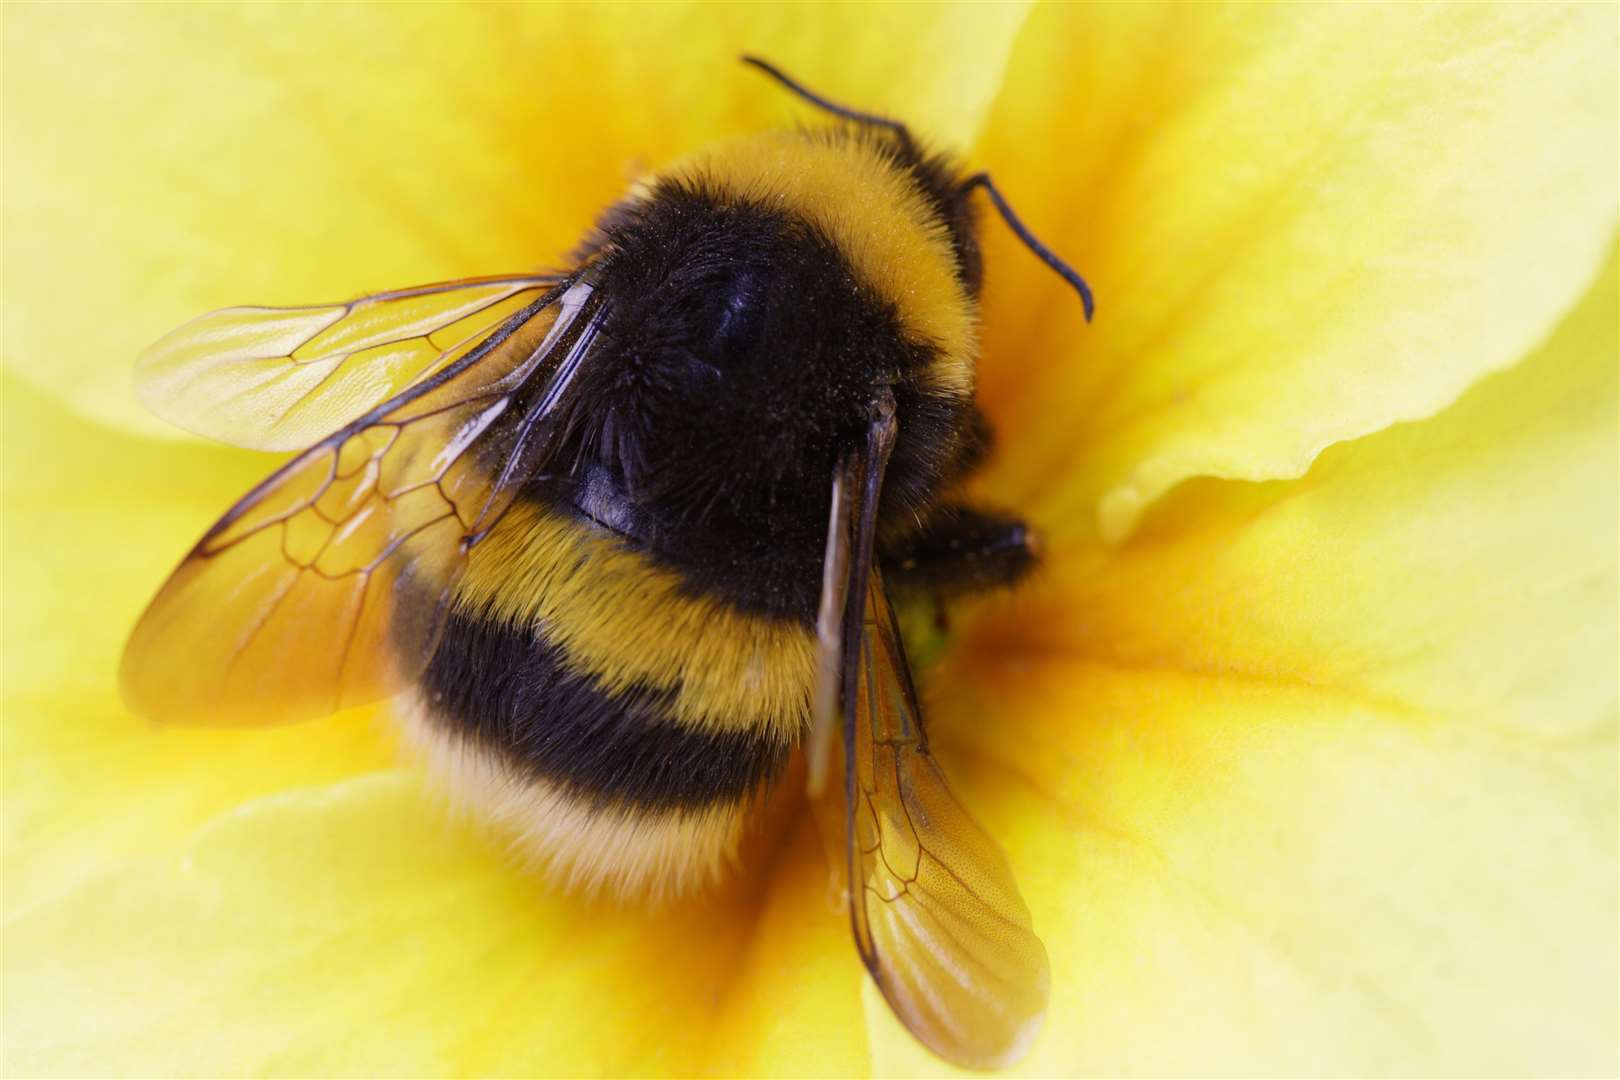 Pollinators, like bees, are a crucial part of the country's food chain and food production